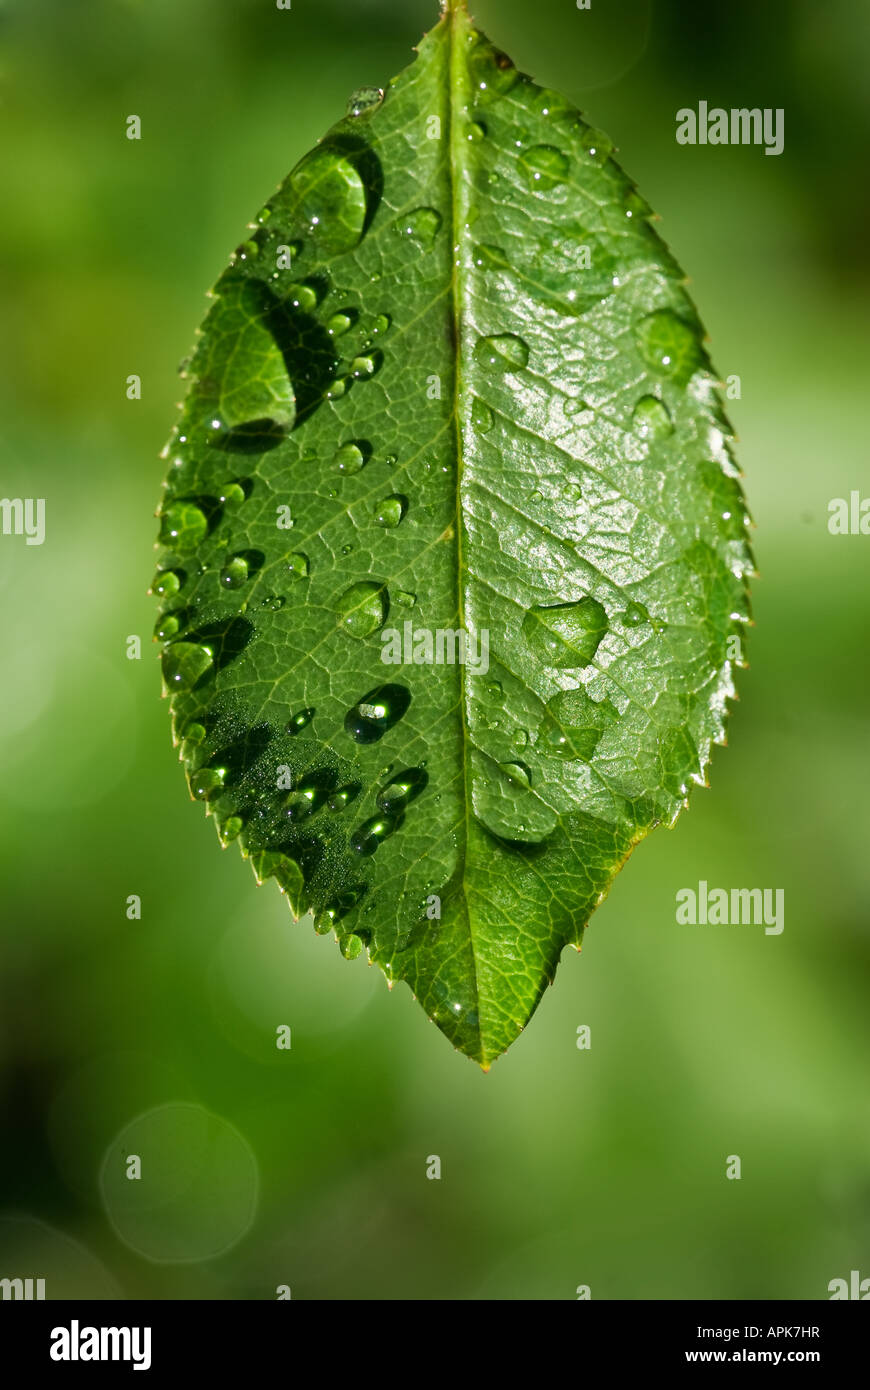 clear water drops on a delicate green leaf Stock Photo